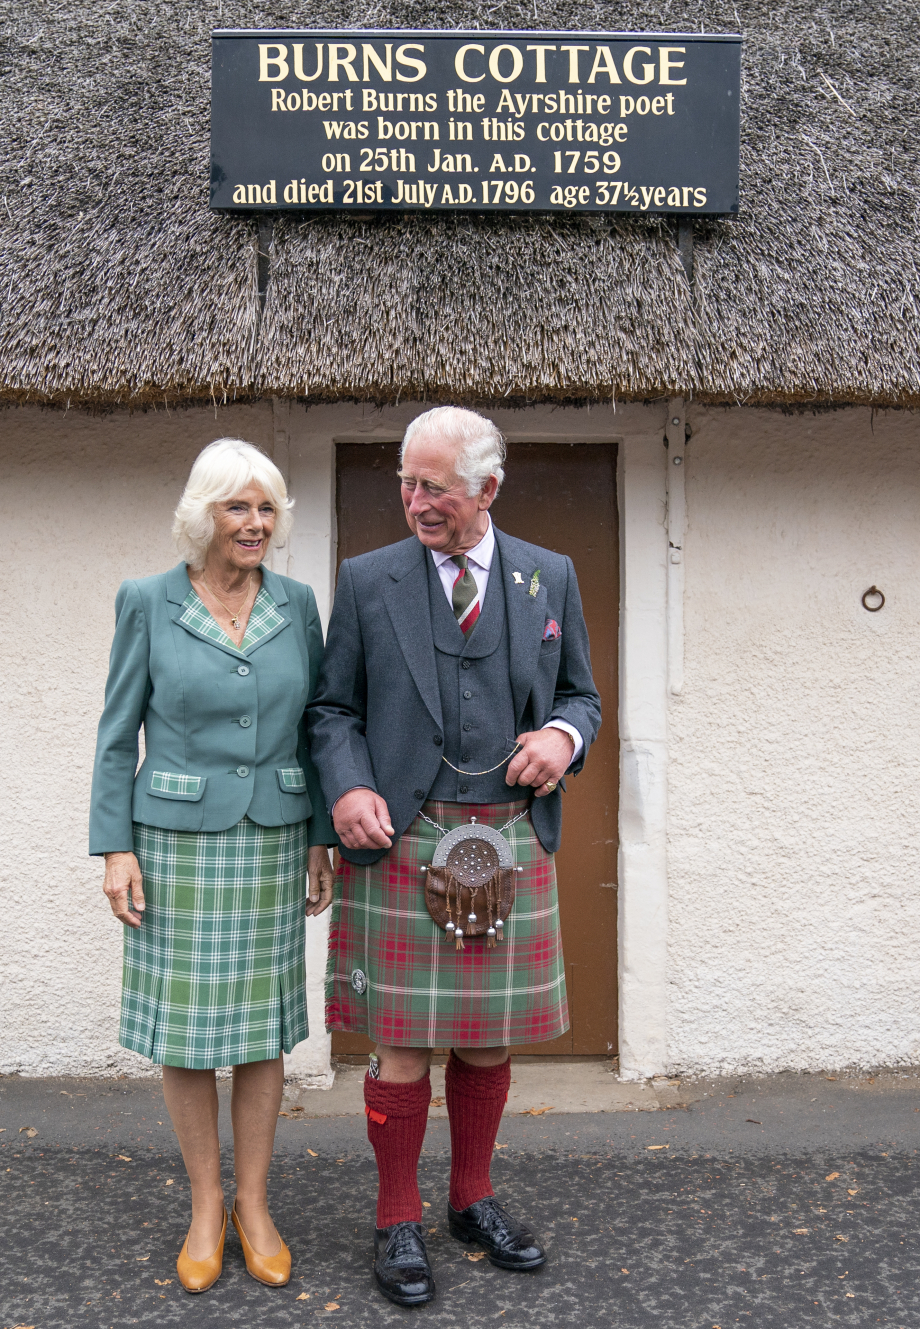 The King and Queen at Burns Cottage